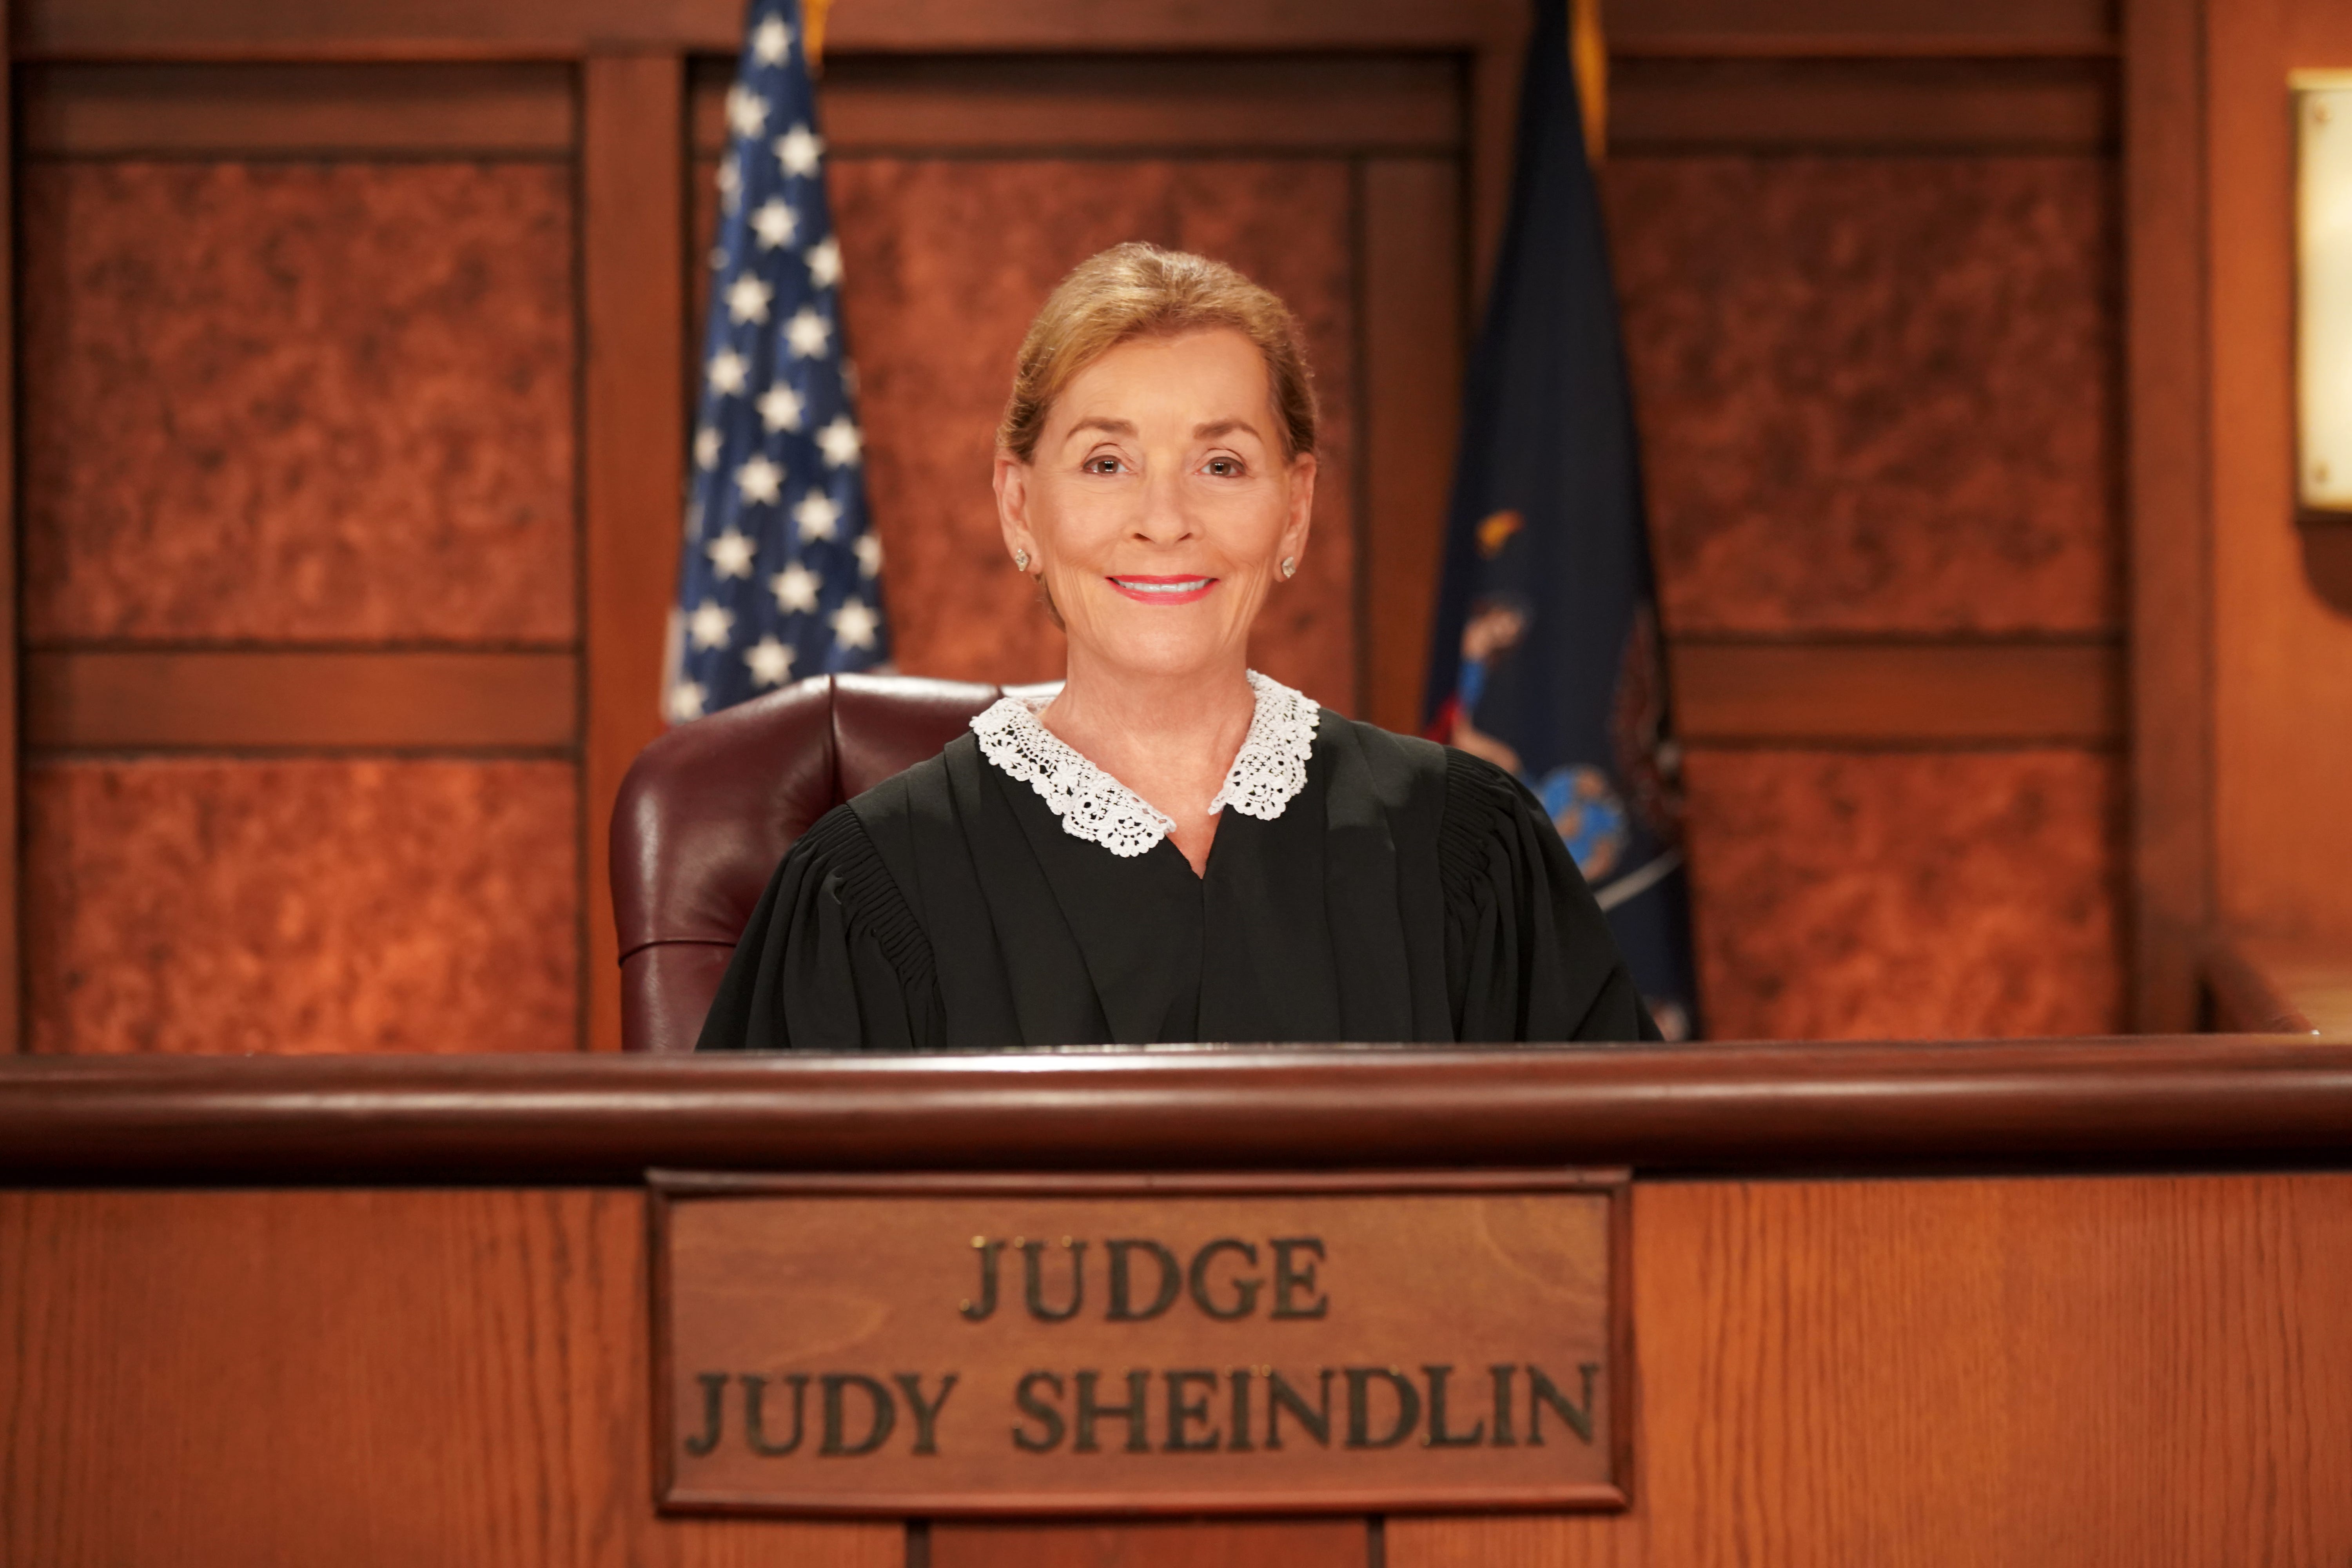 as I was at the beginning," Judy Sheindlin says of her "Judge Jud...